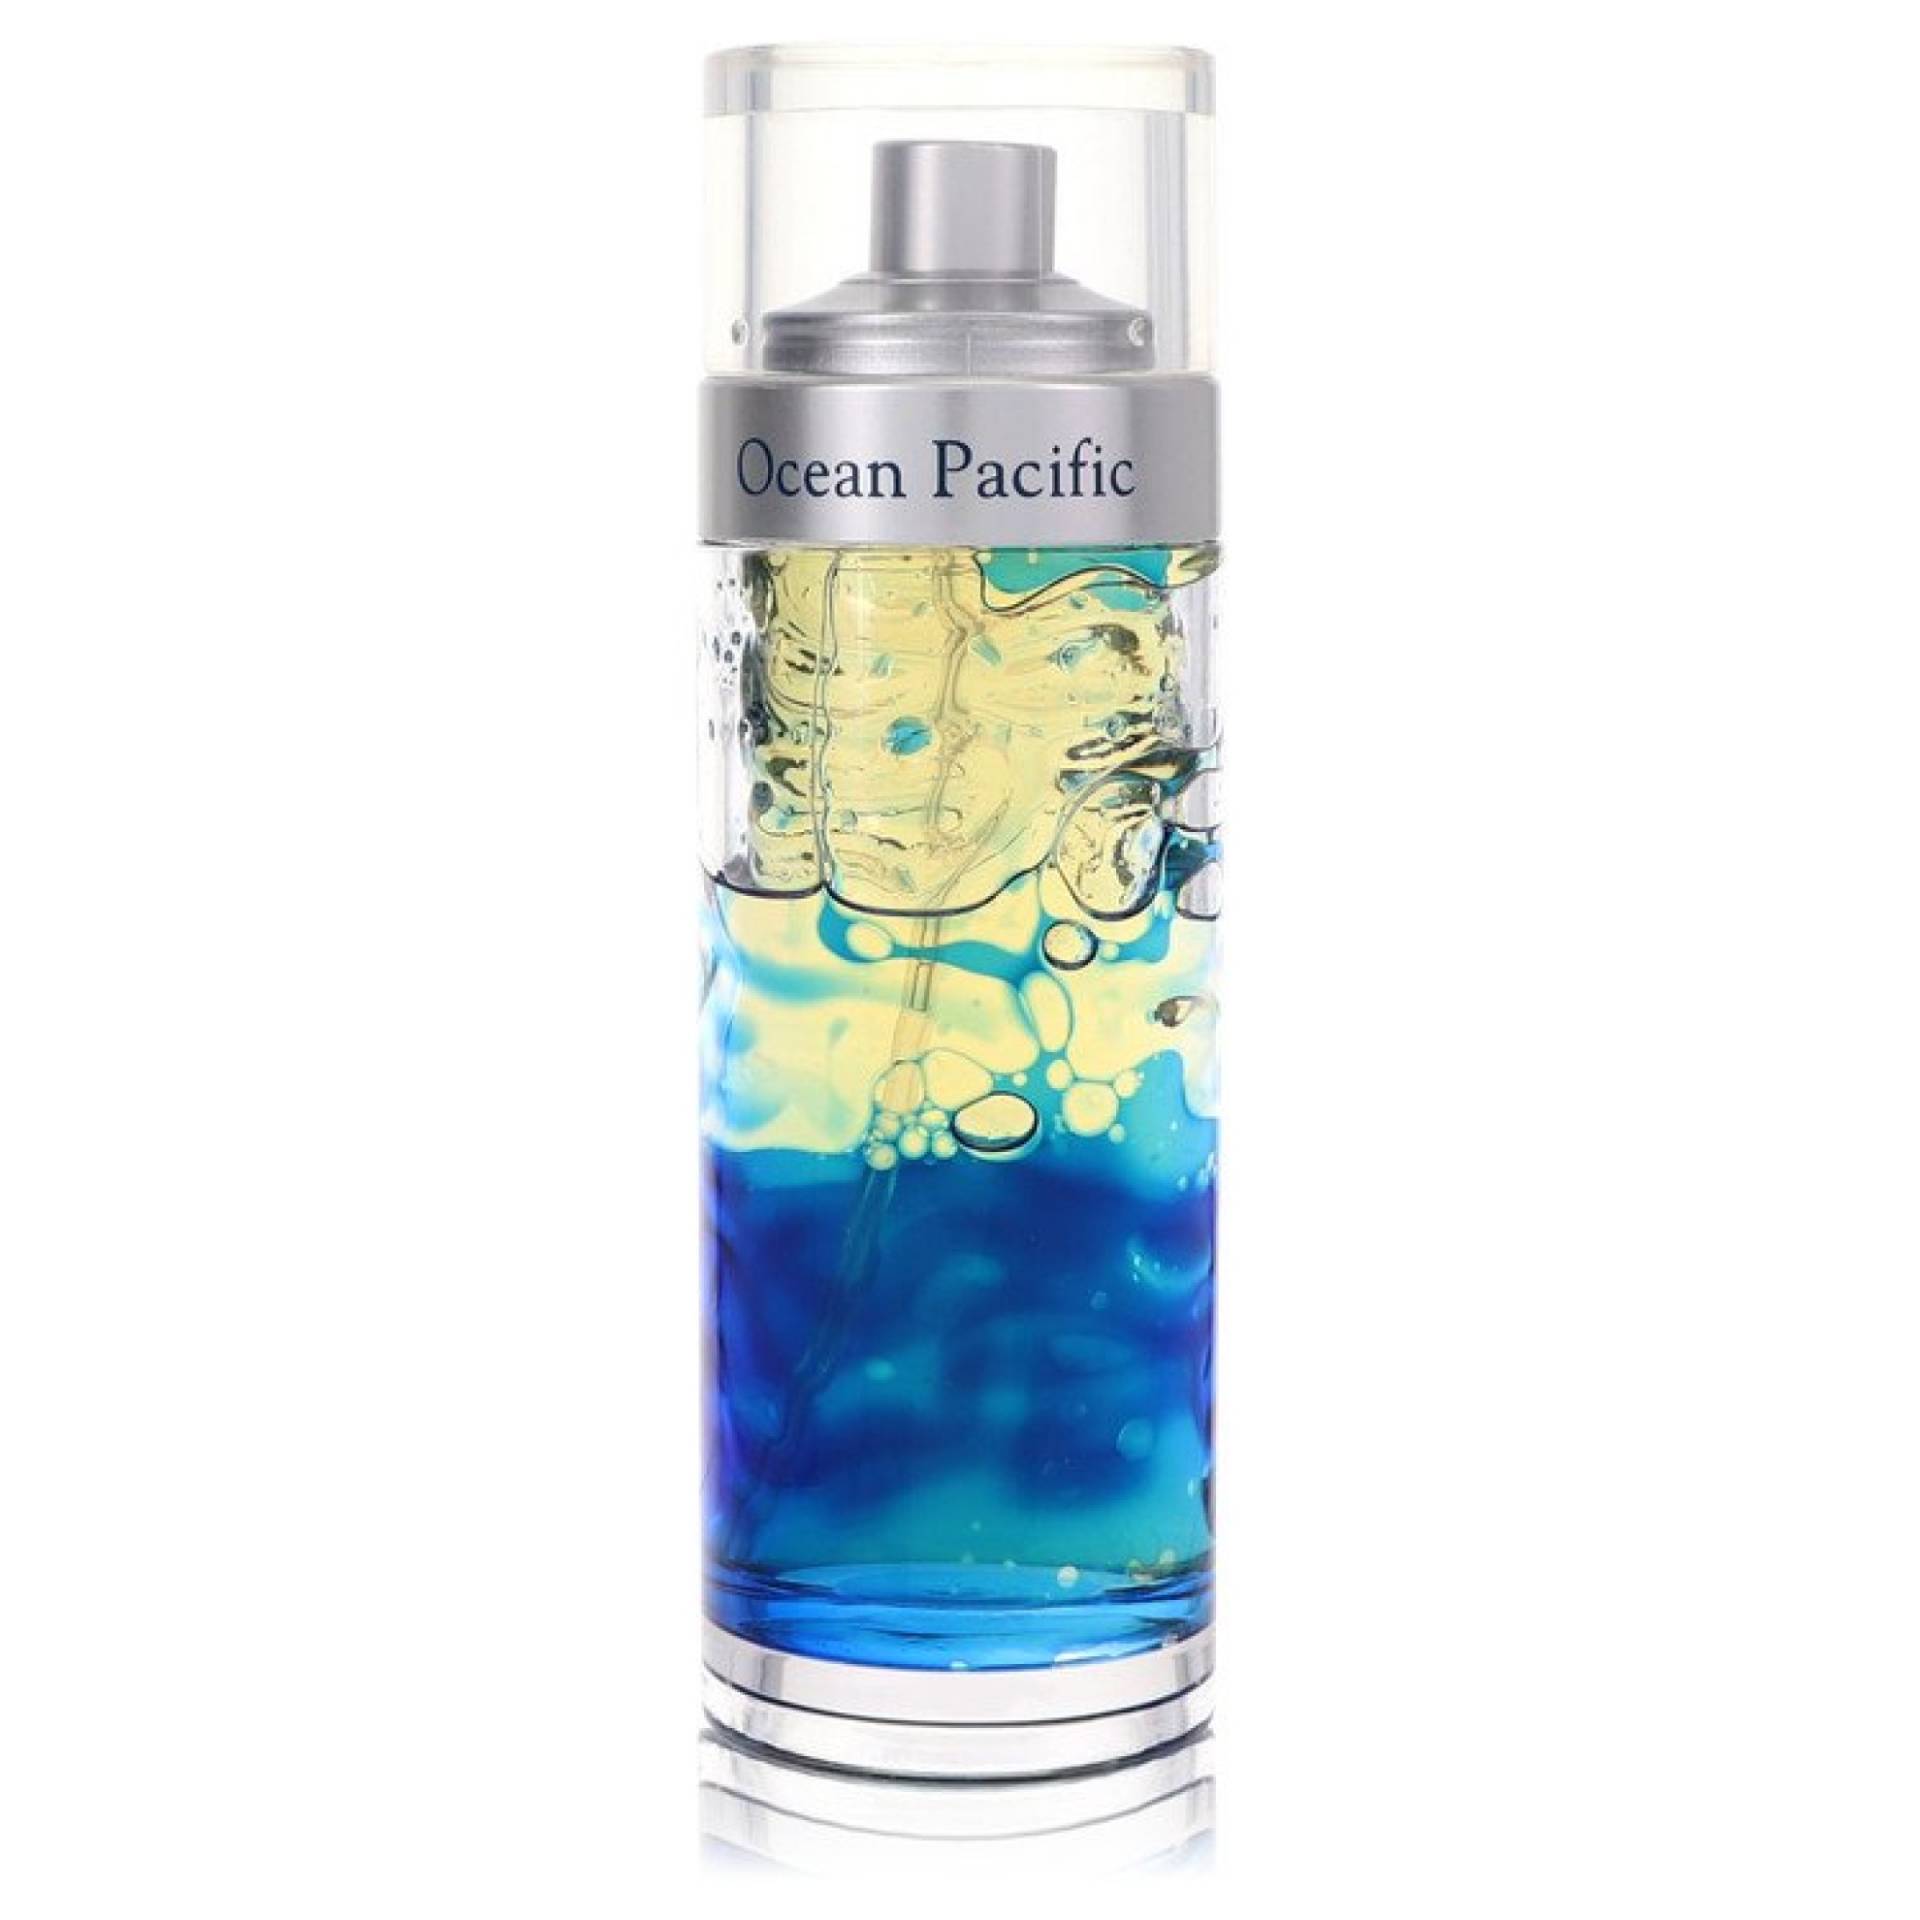 Ocean Pacific Cologne Spray (unboxed) 50 ml